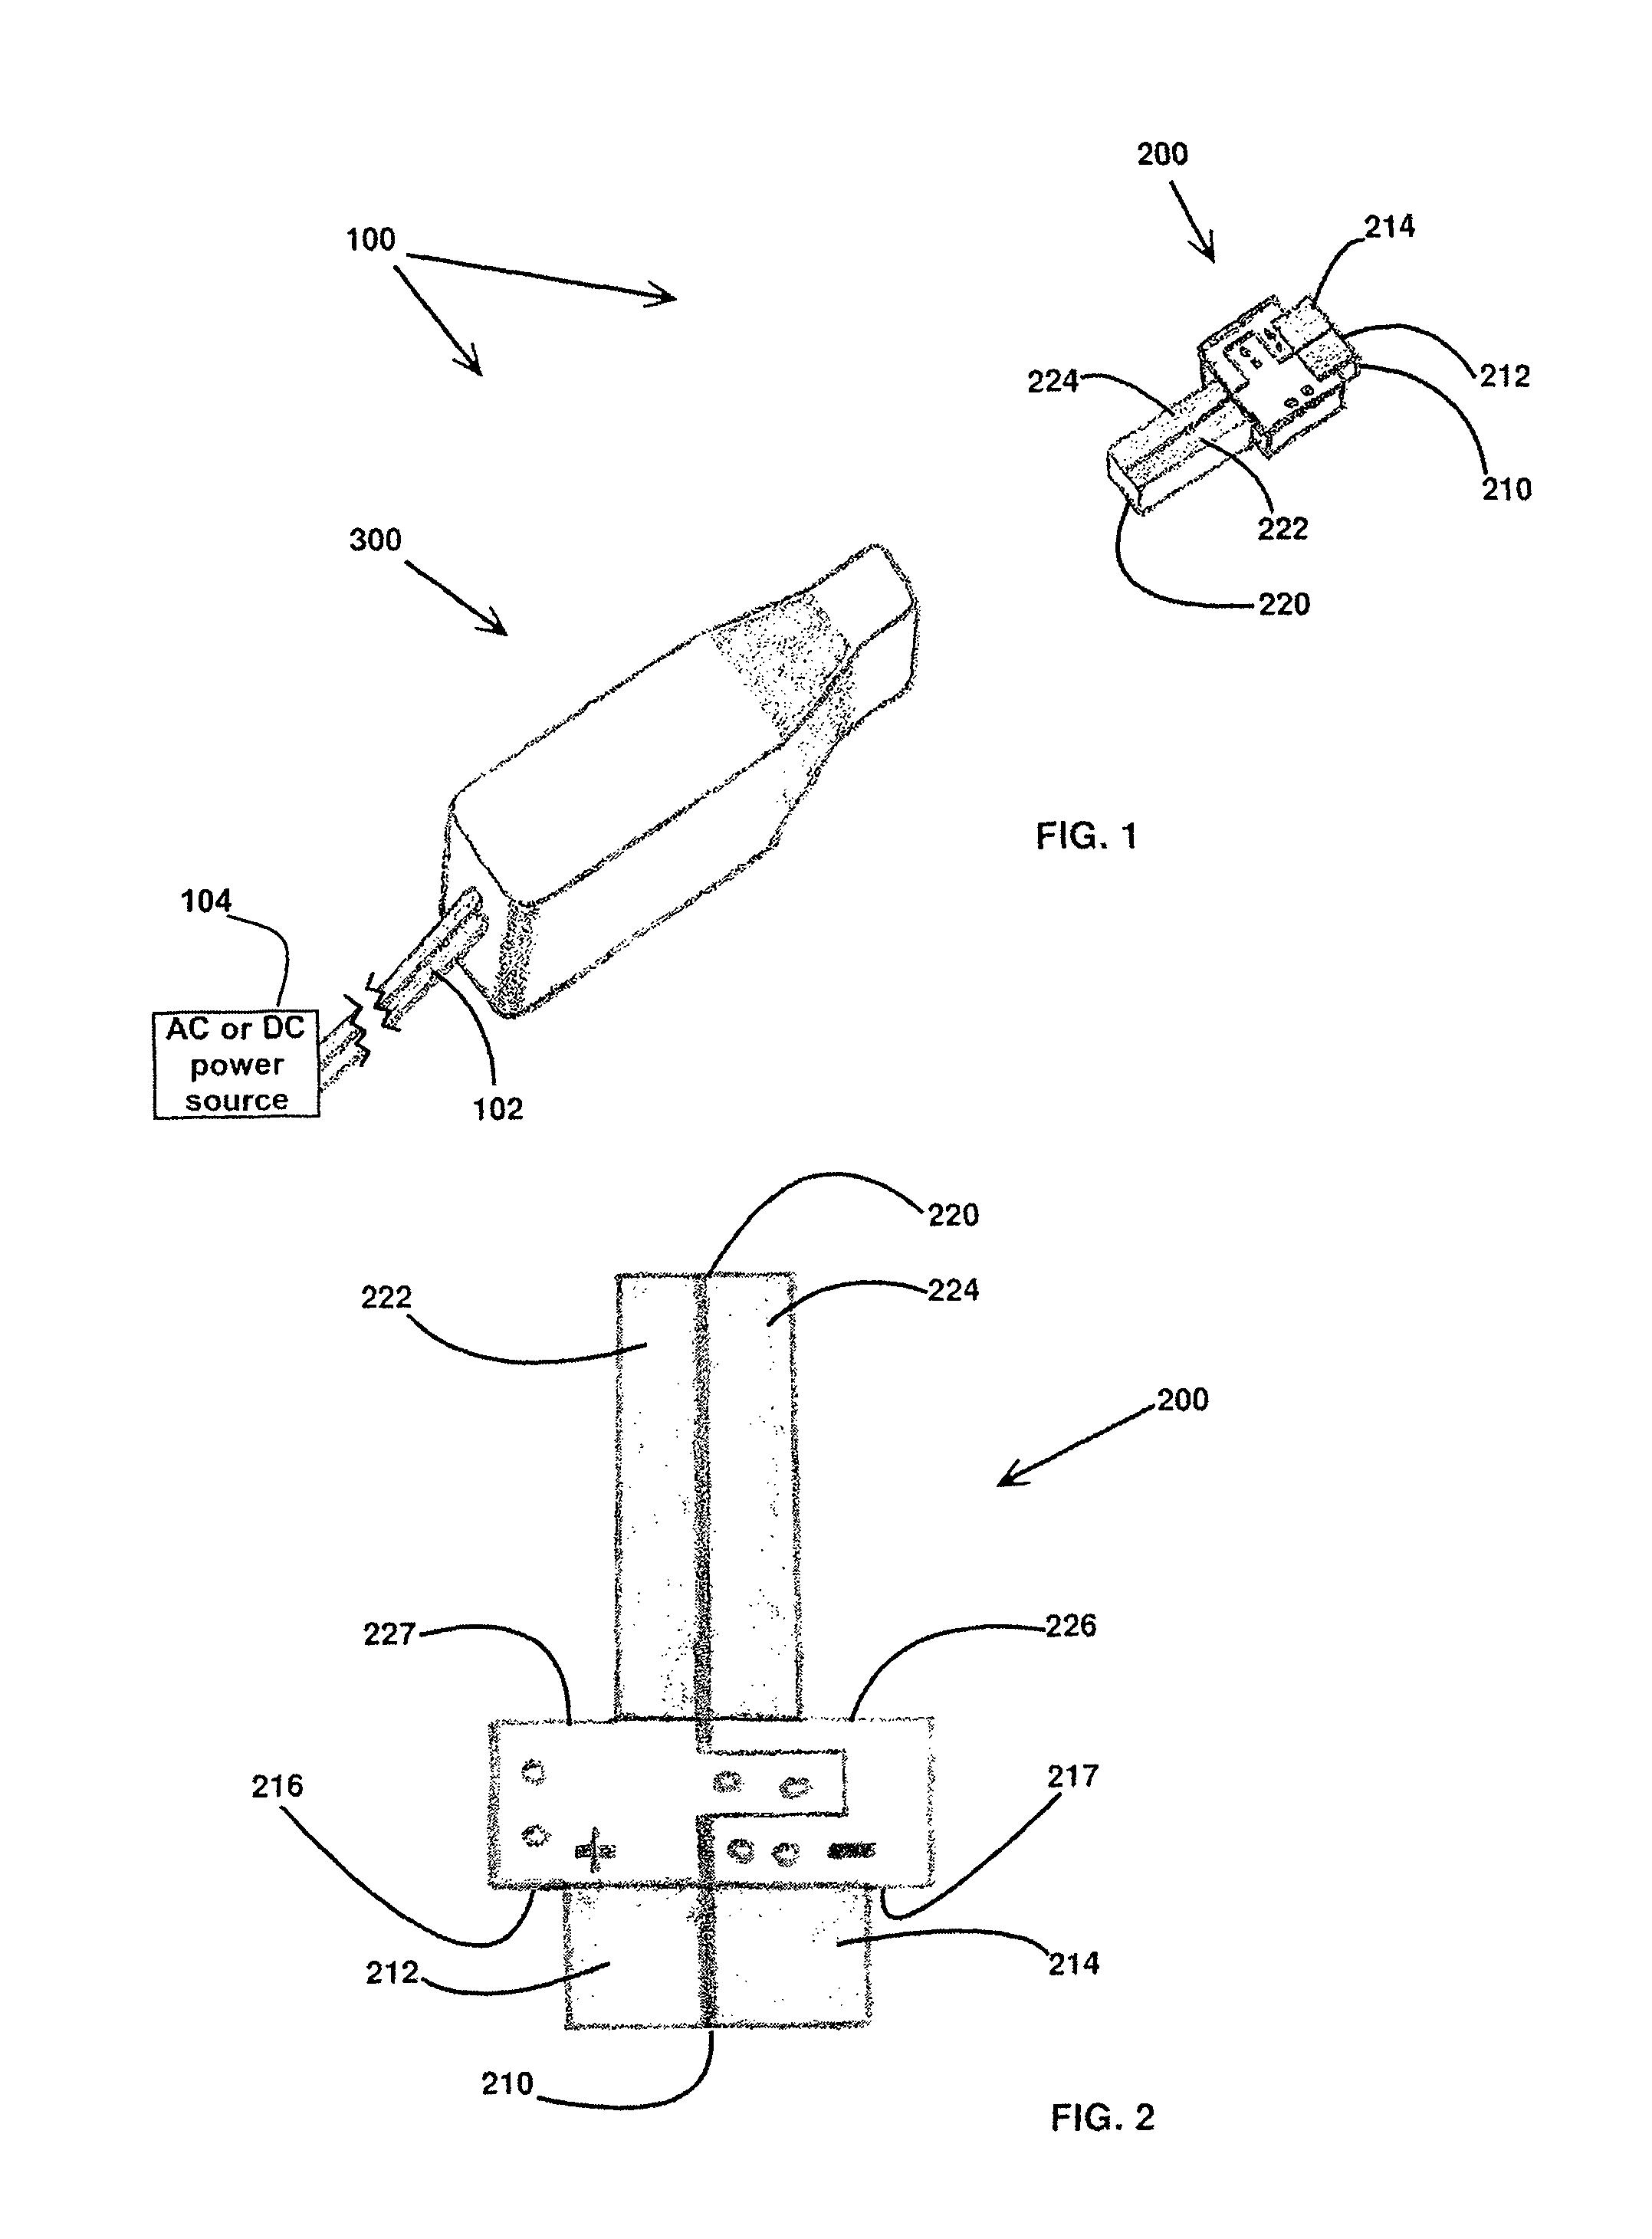 Charging interface for rechargeable devices